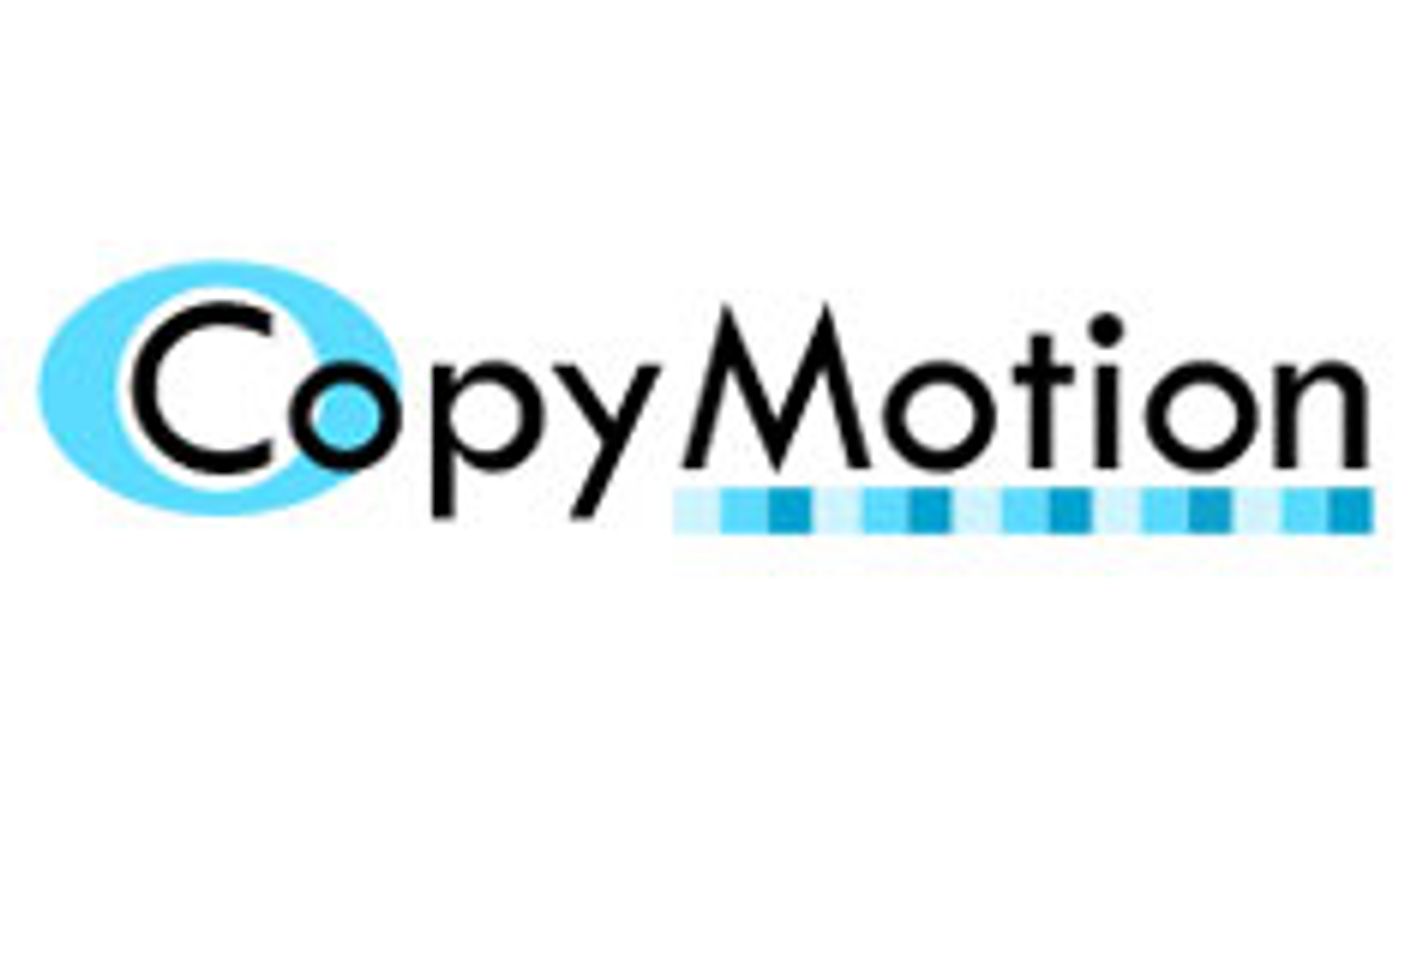 CopyMotion Offers High-tech Video Copyright Protection Service